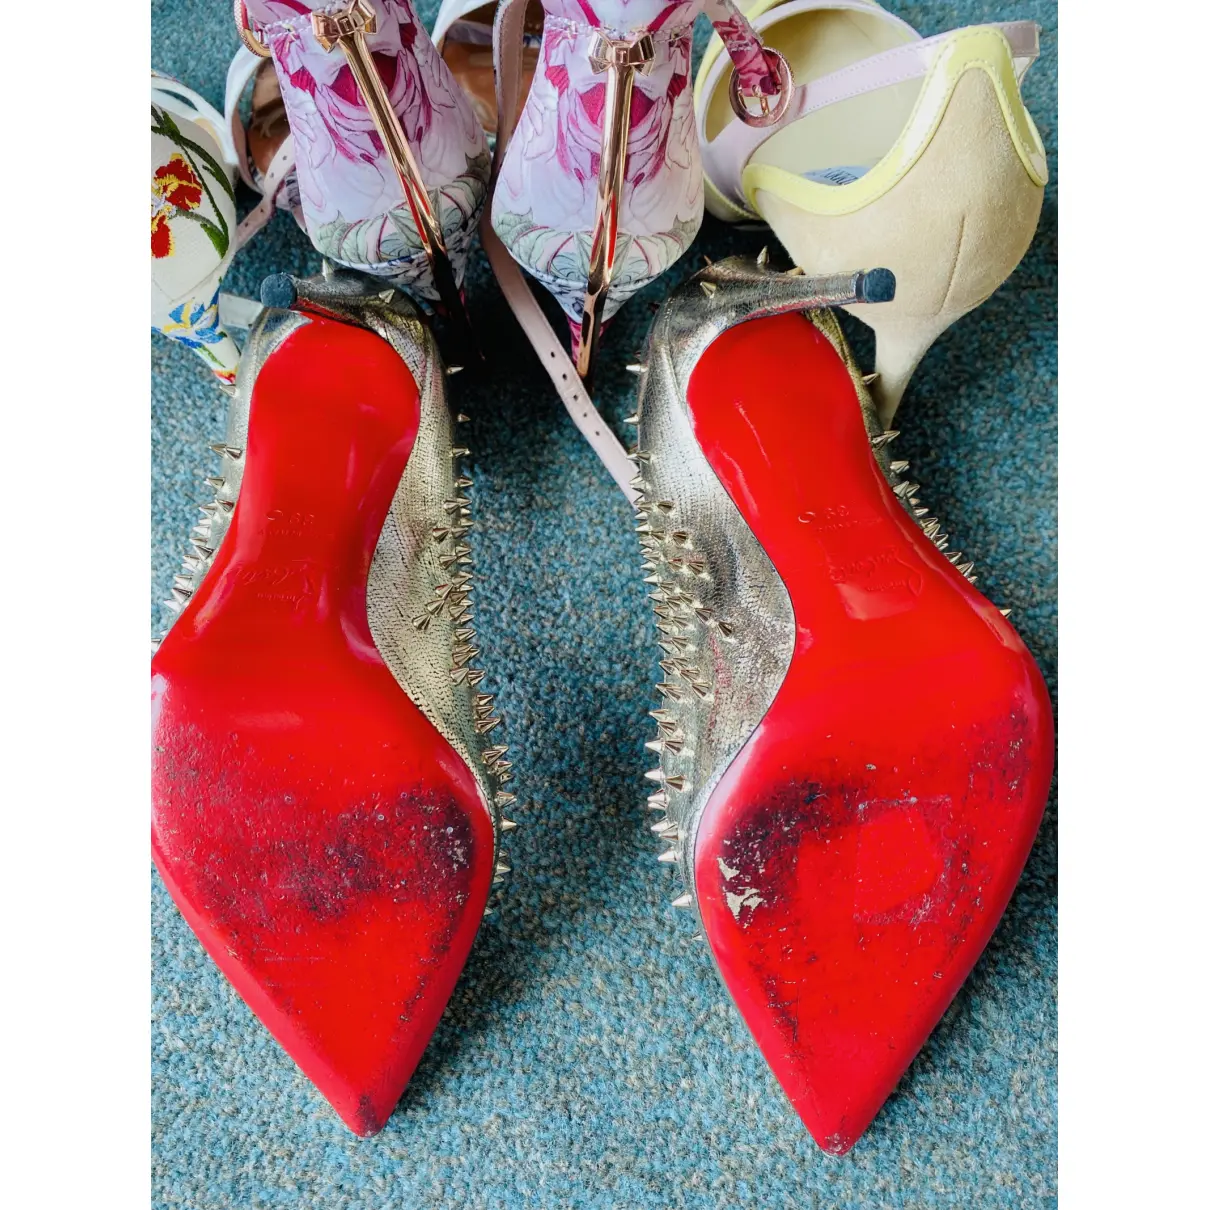 Nosy Spikes leather heels Christian Louboutin